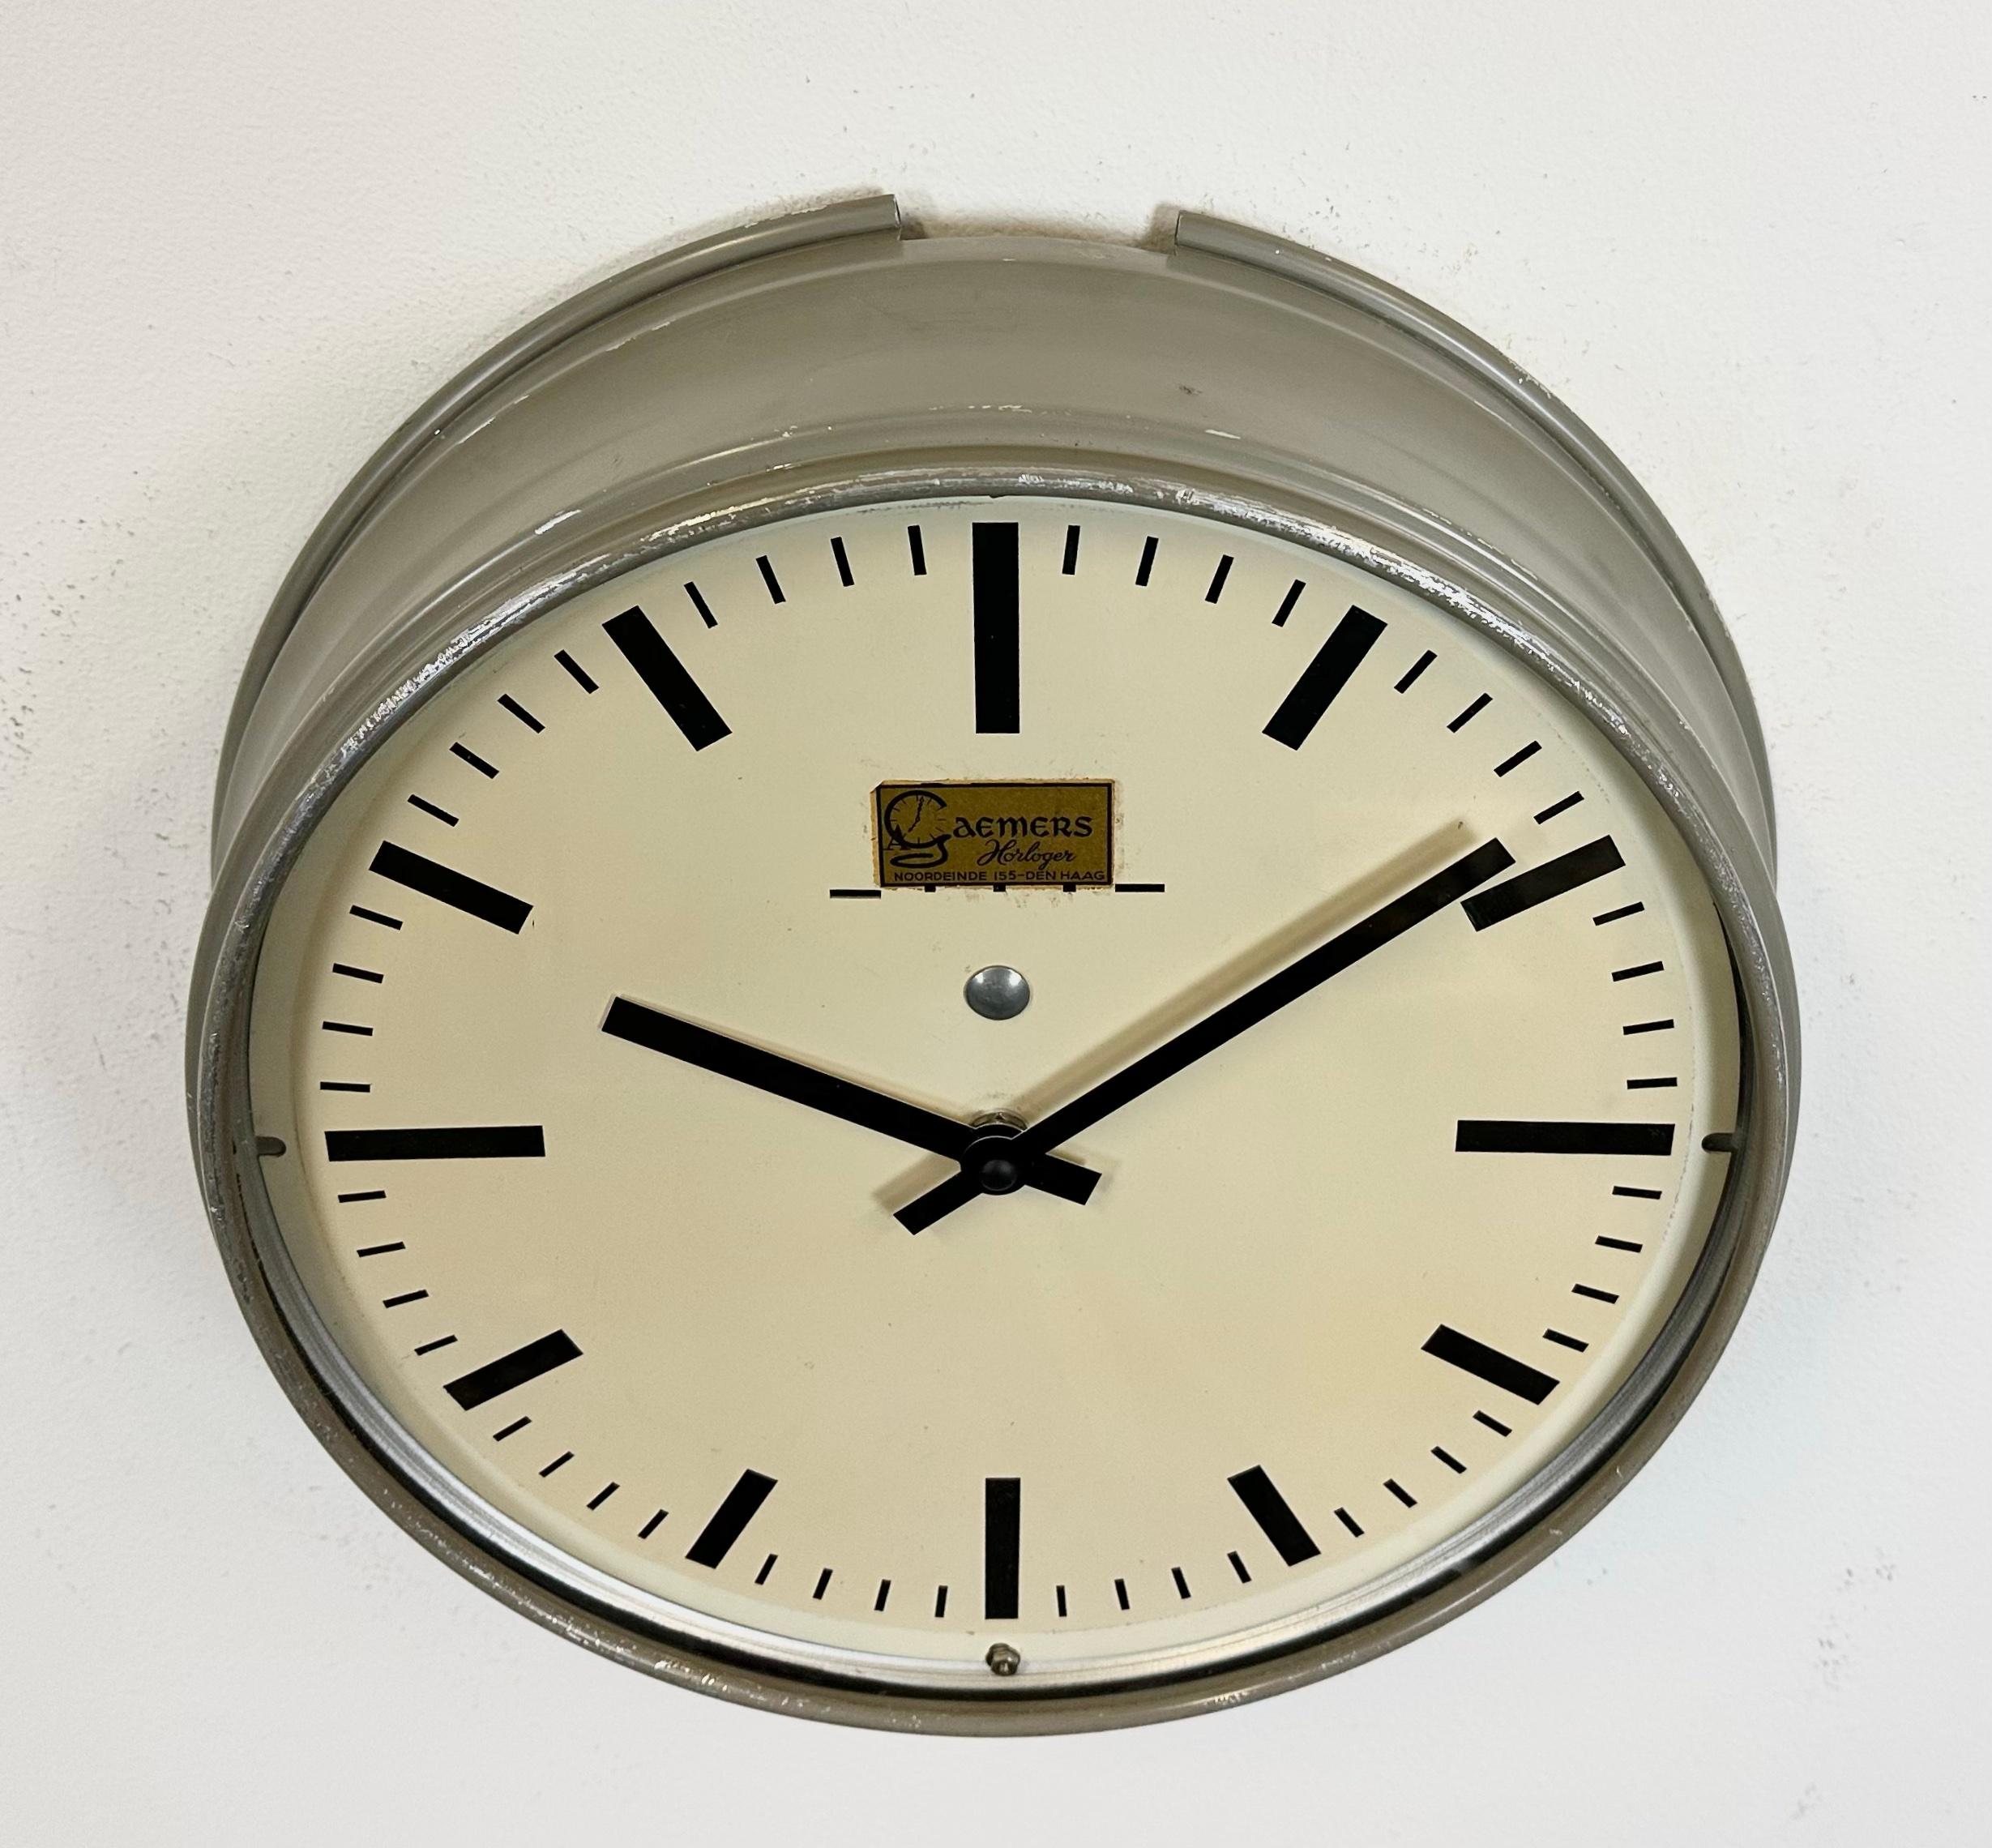 Vintage Dutch Wall Clock from Gaemers Horloger,  1950s In Good Condition For Sale In Kojetice, CZ